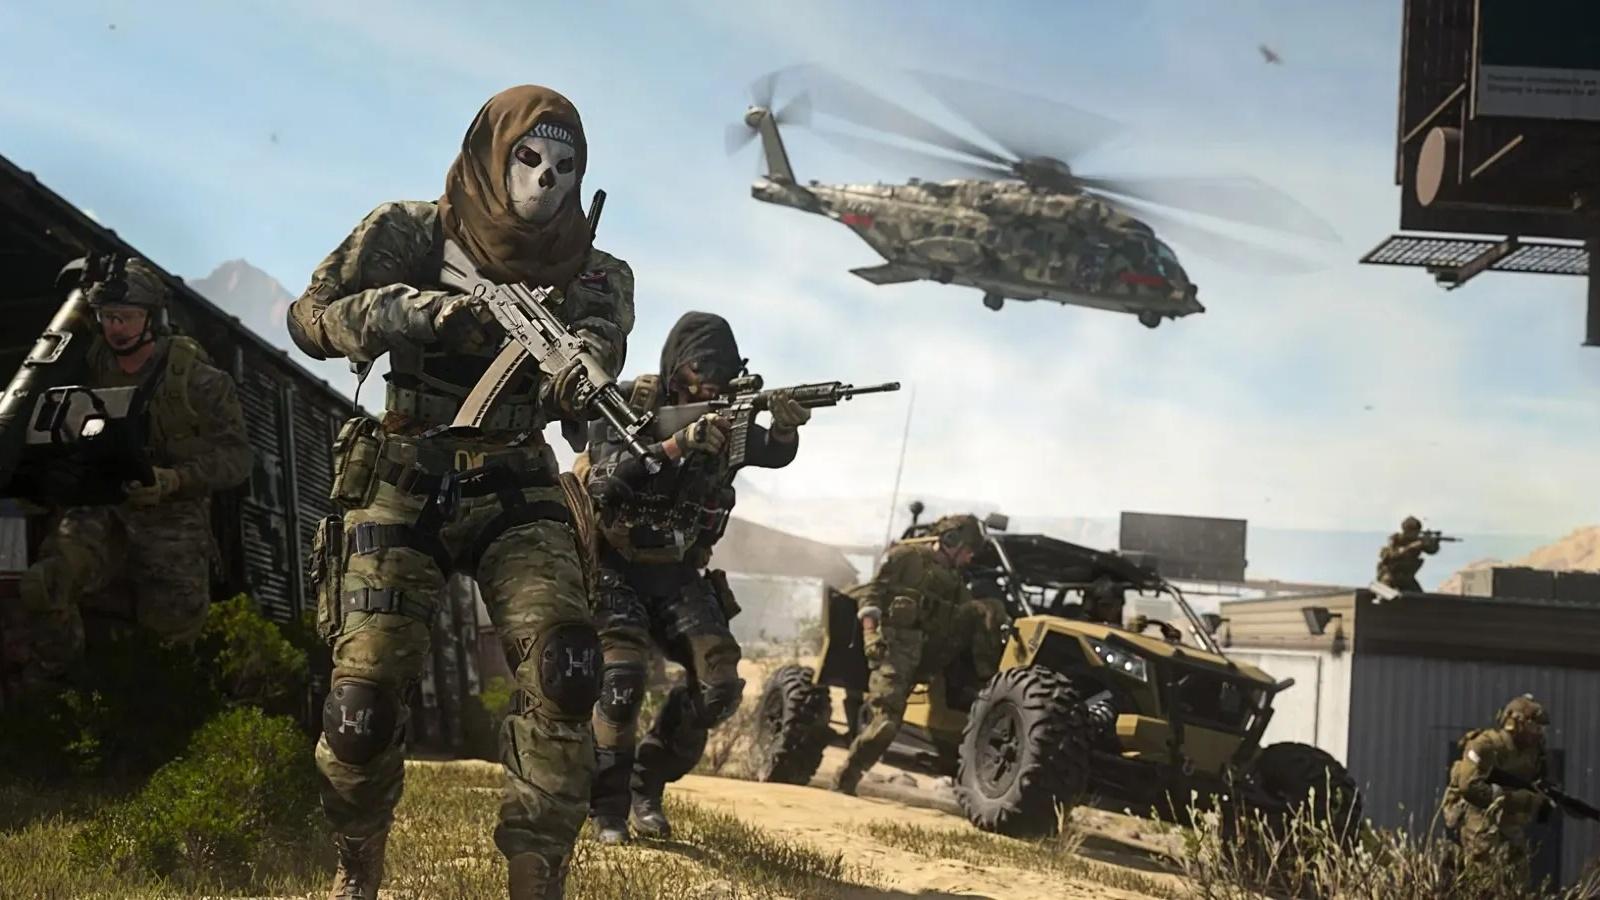 CoD Warzone 2.0 and Modern Warfare 2 fans rage at the arrival of